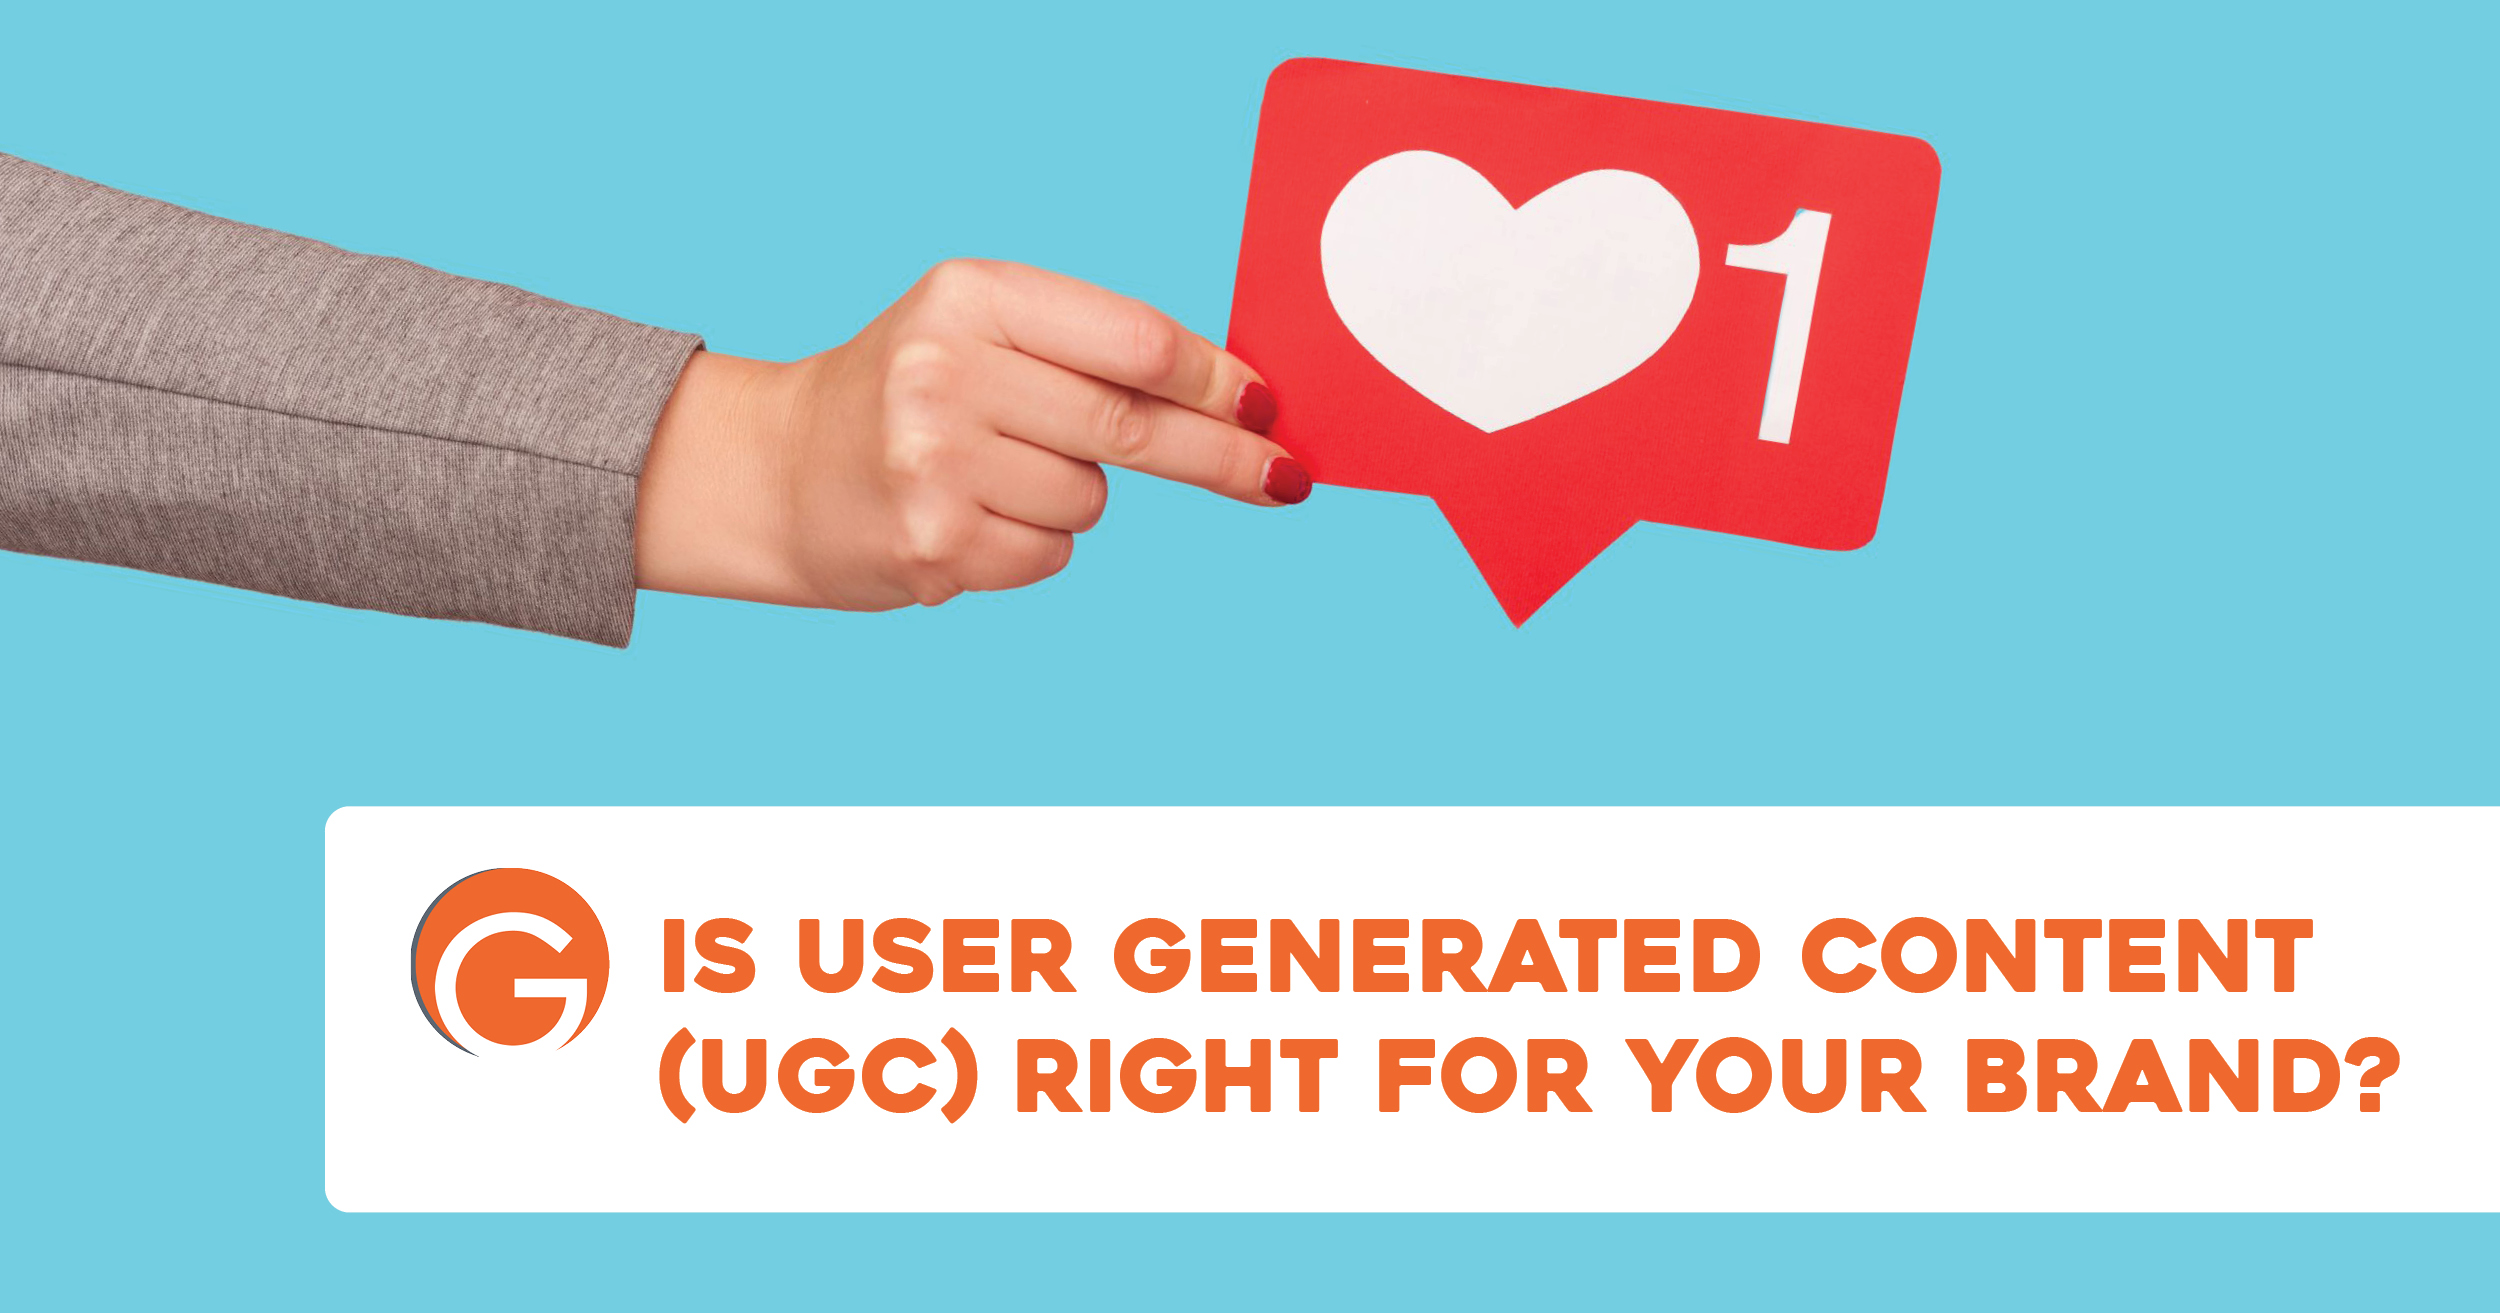 Is User Generated Content (UGC) right for your brand?